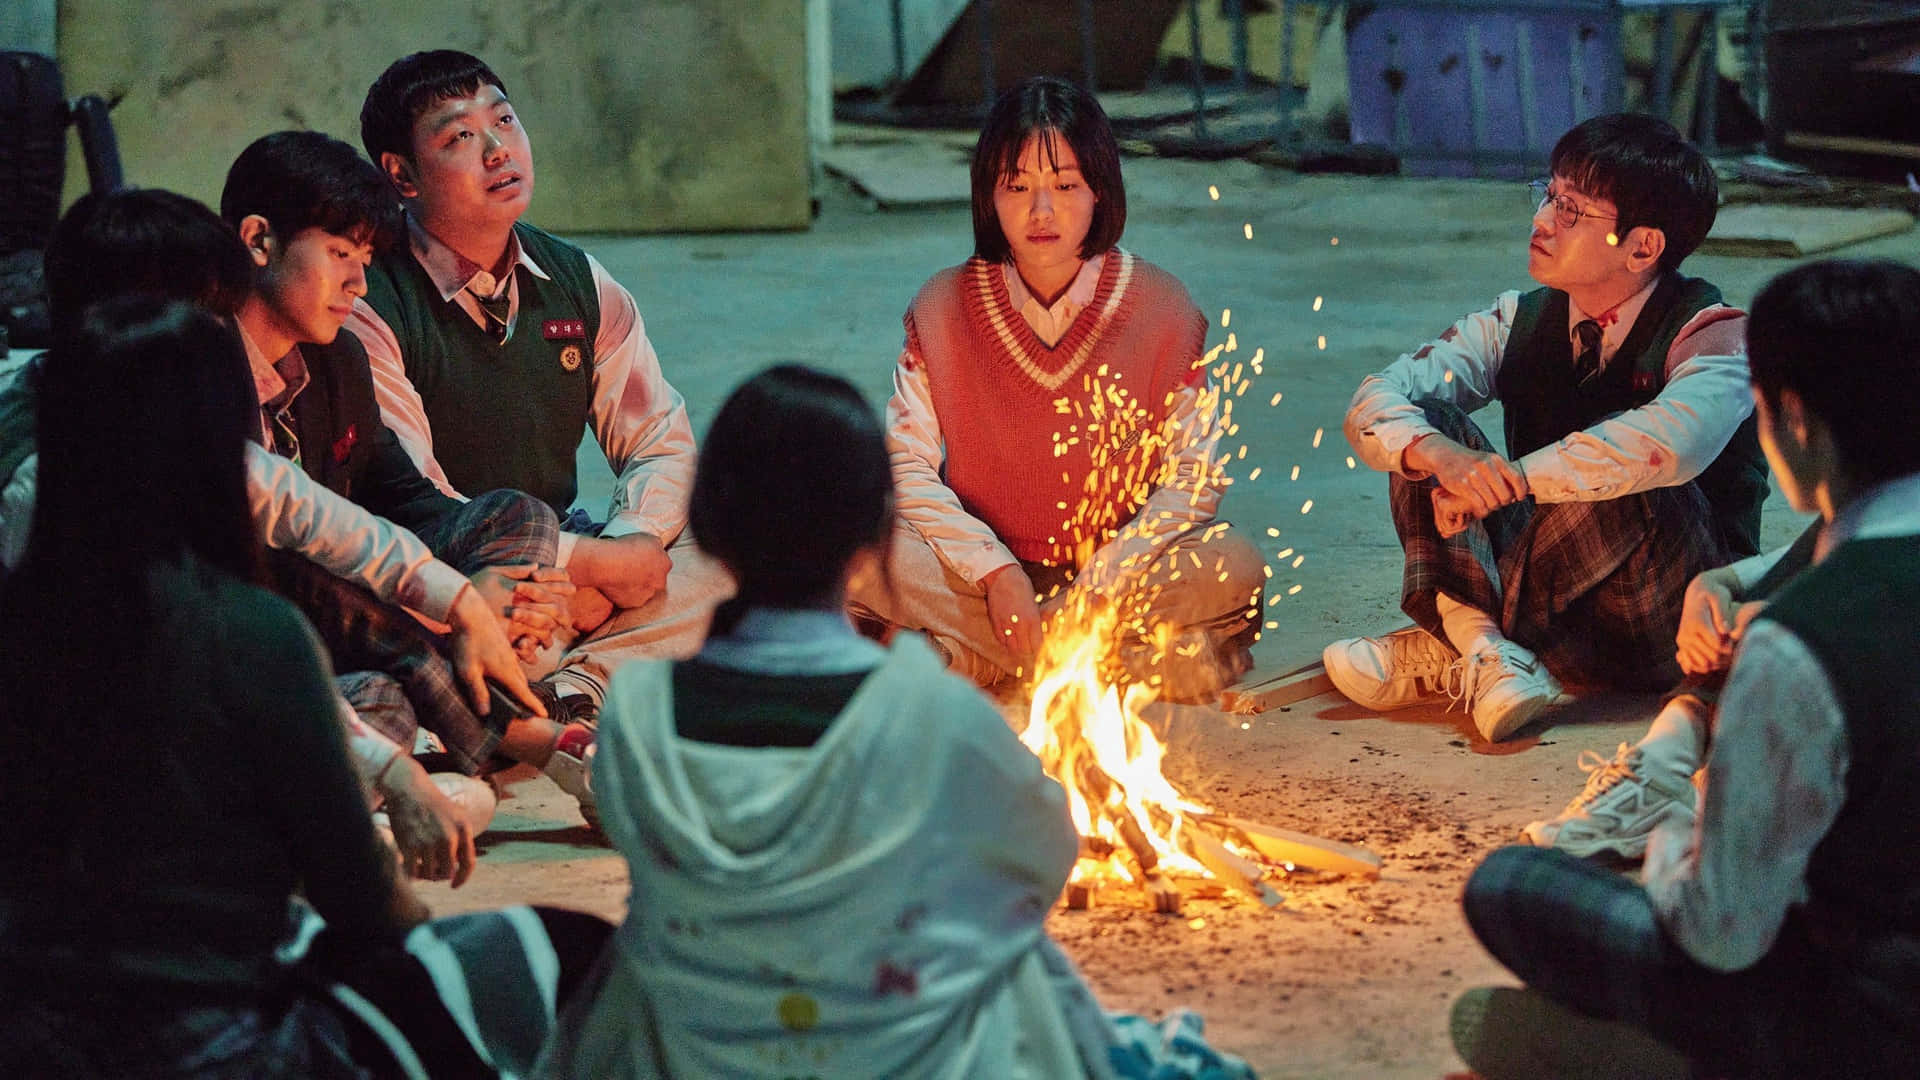 A Group Of People Sitting Around A Fire